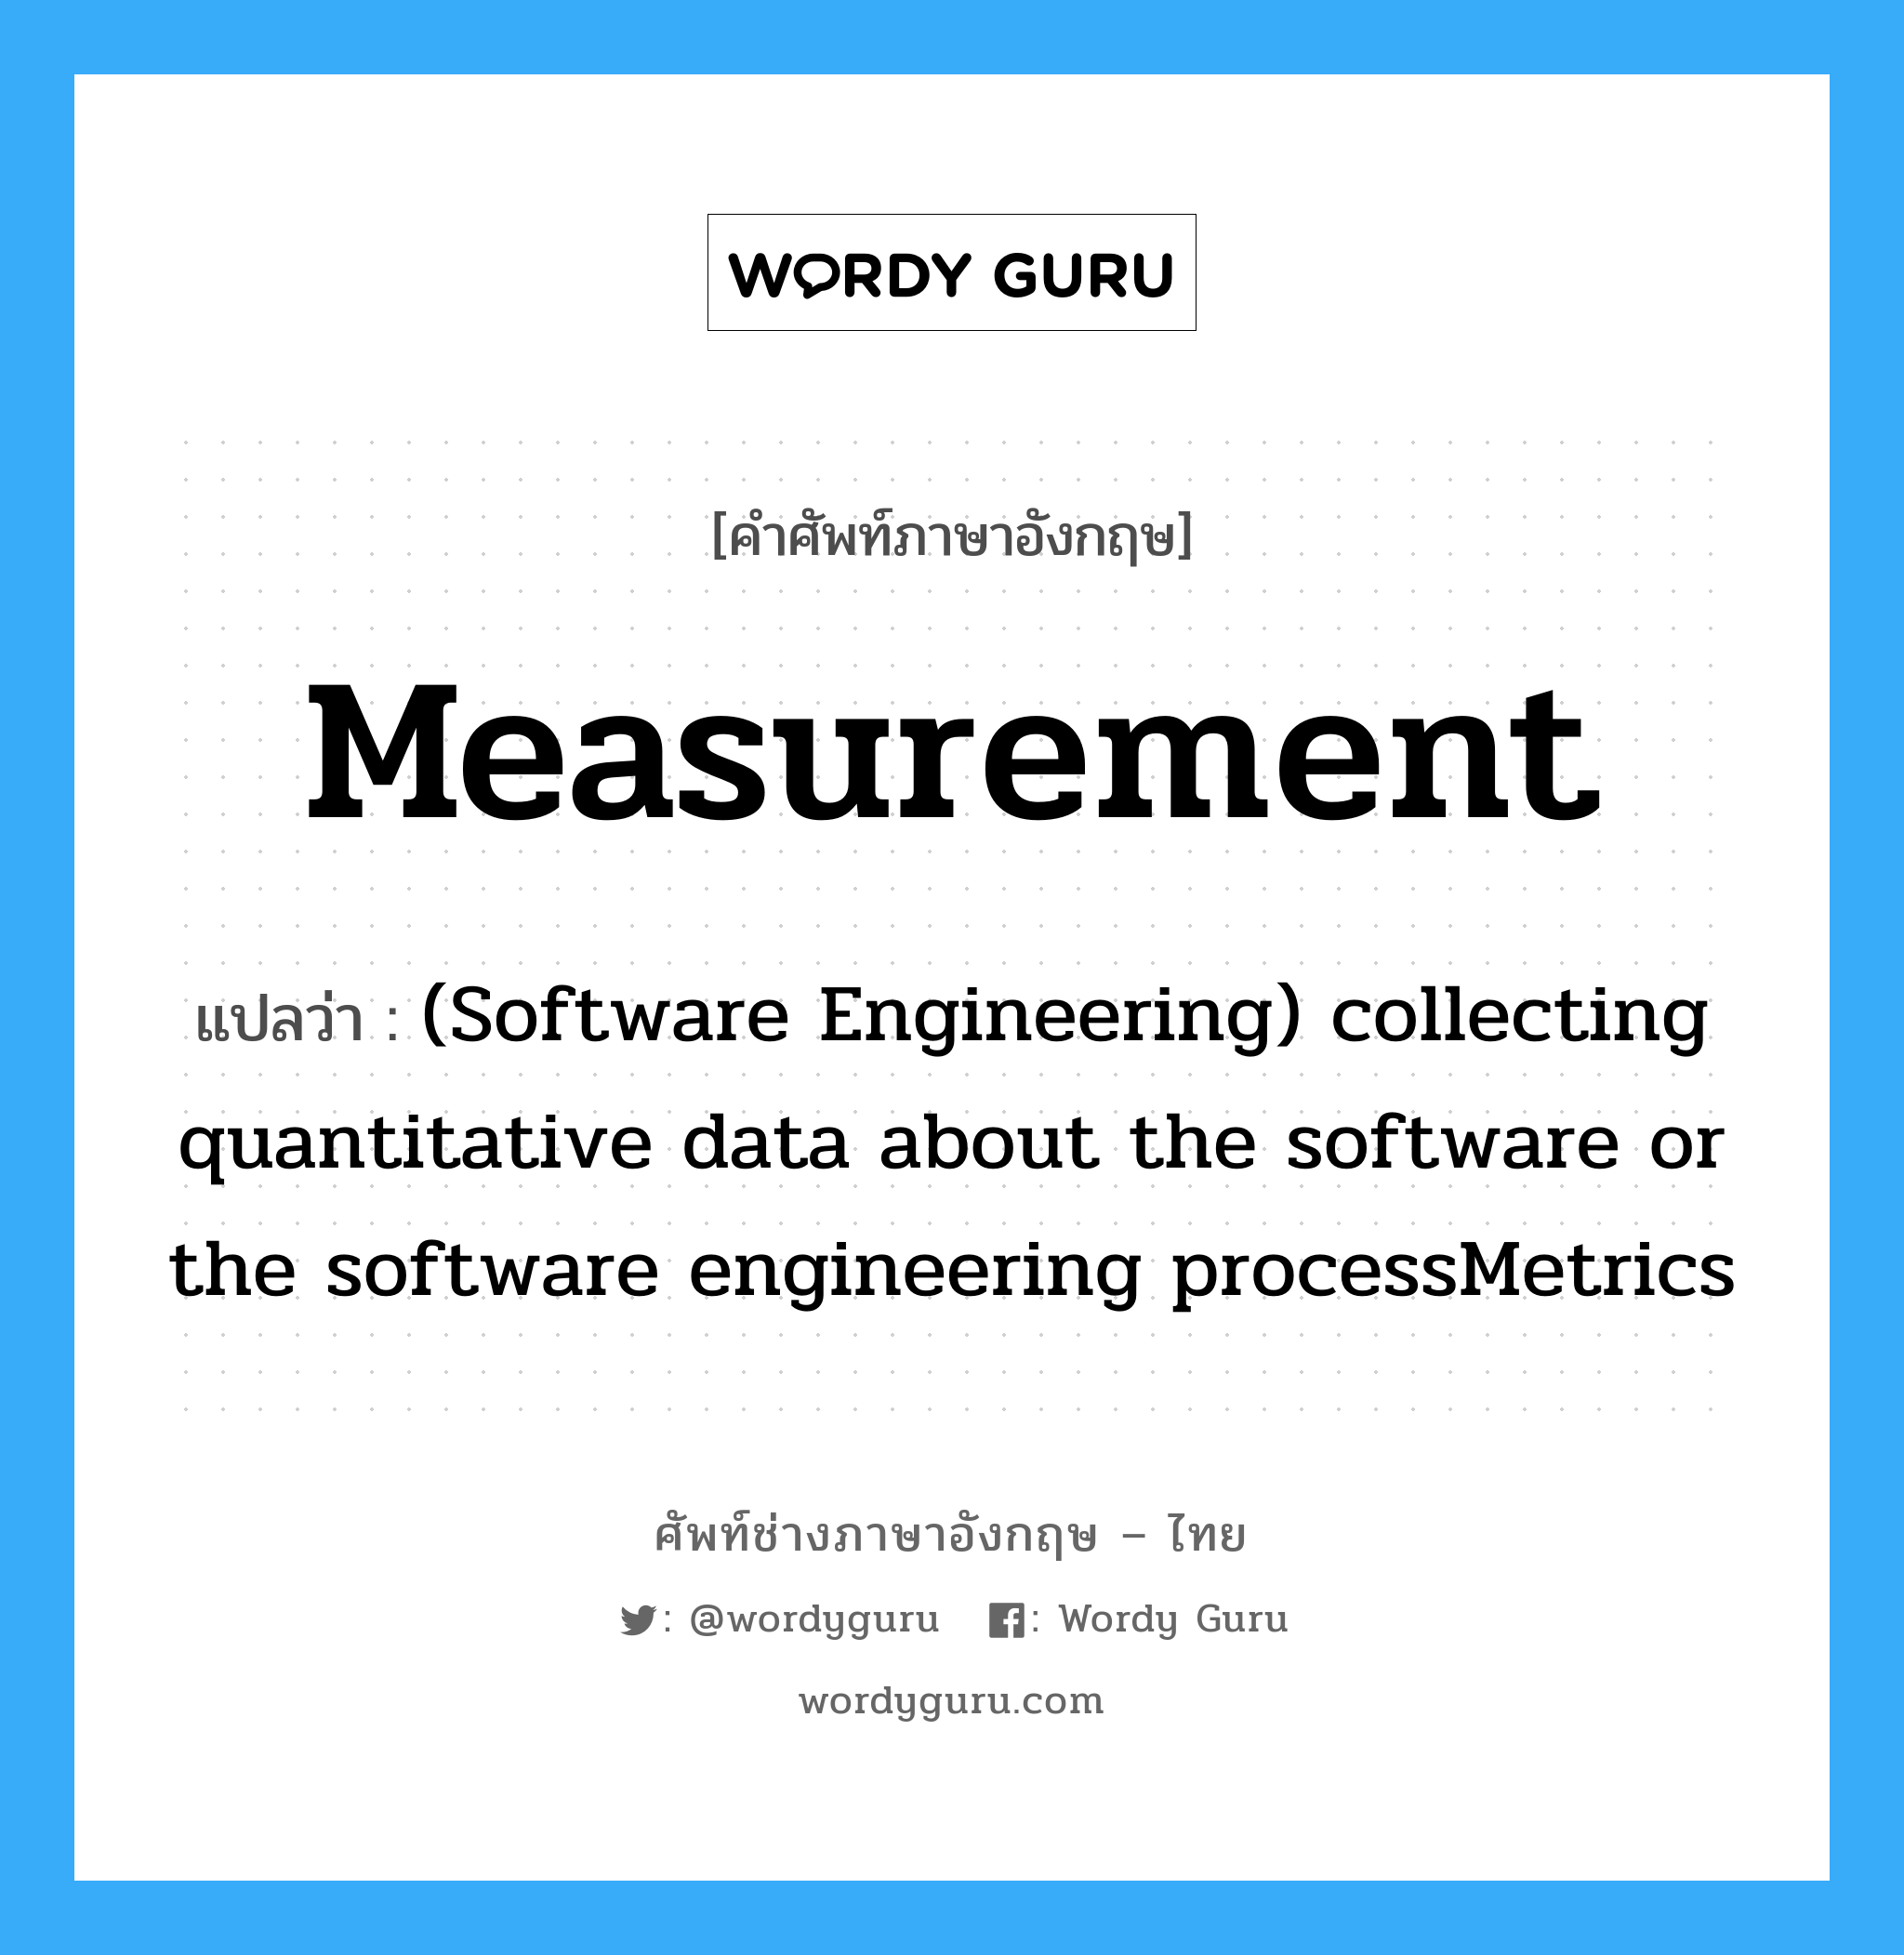 measurement แปลว่า?, คำศัพท์ช่างภาษาอังกฤษ - ไทย Measurement คำศัพท์ภาษาอังกฤษ Measurement แปลว่า (Software Engineering) collecting quantitative data about the software or the software engineering processMetrics